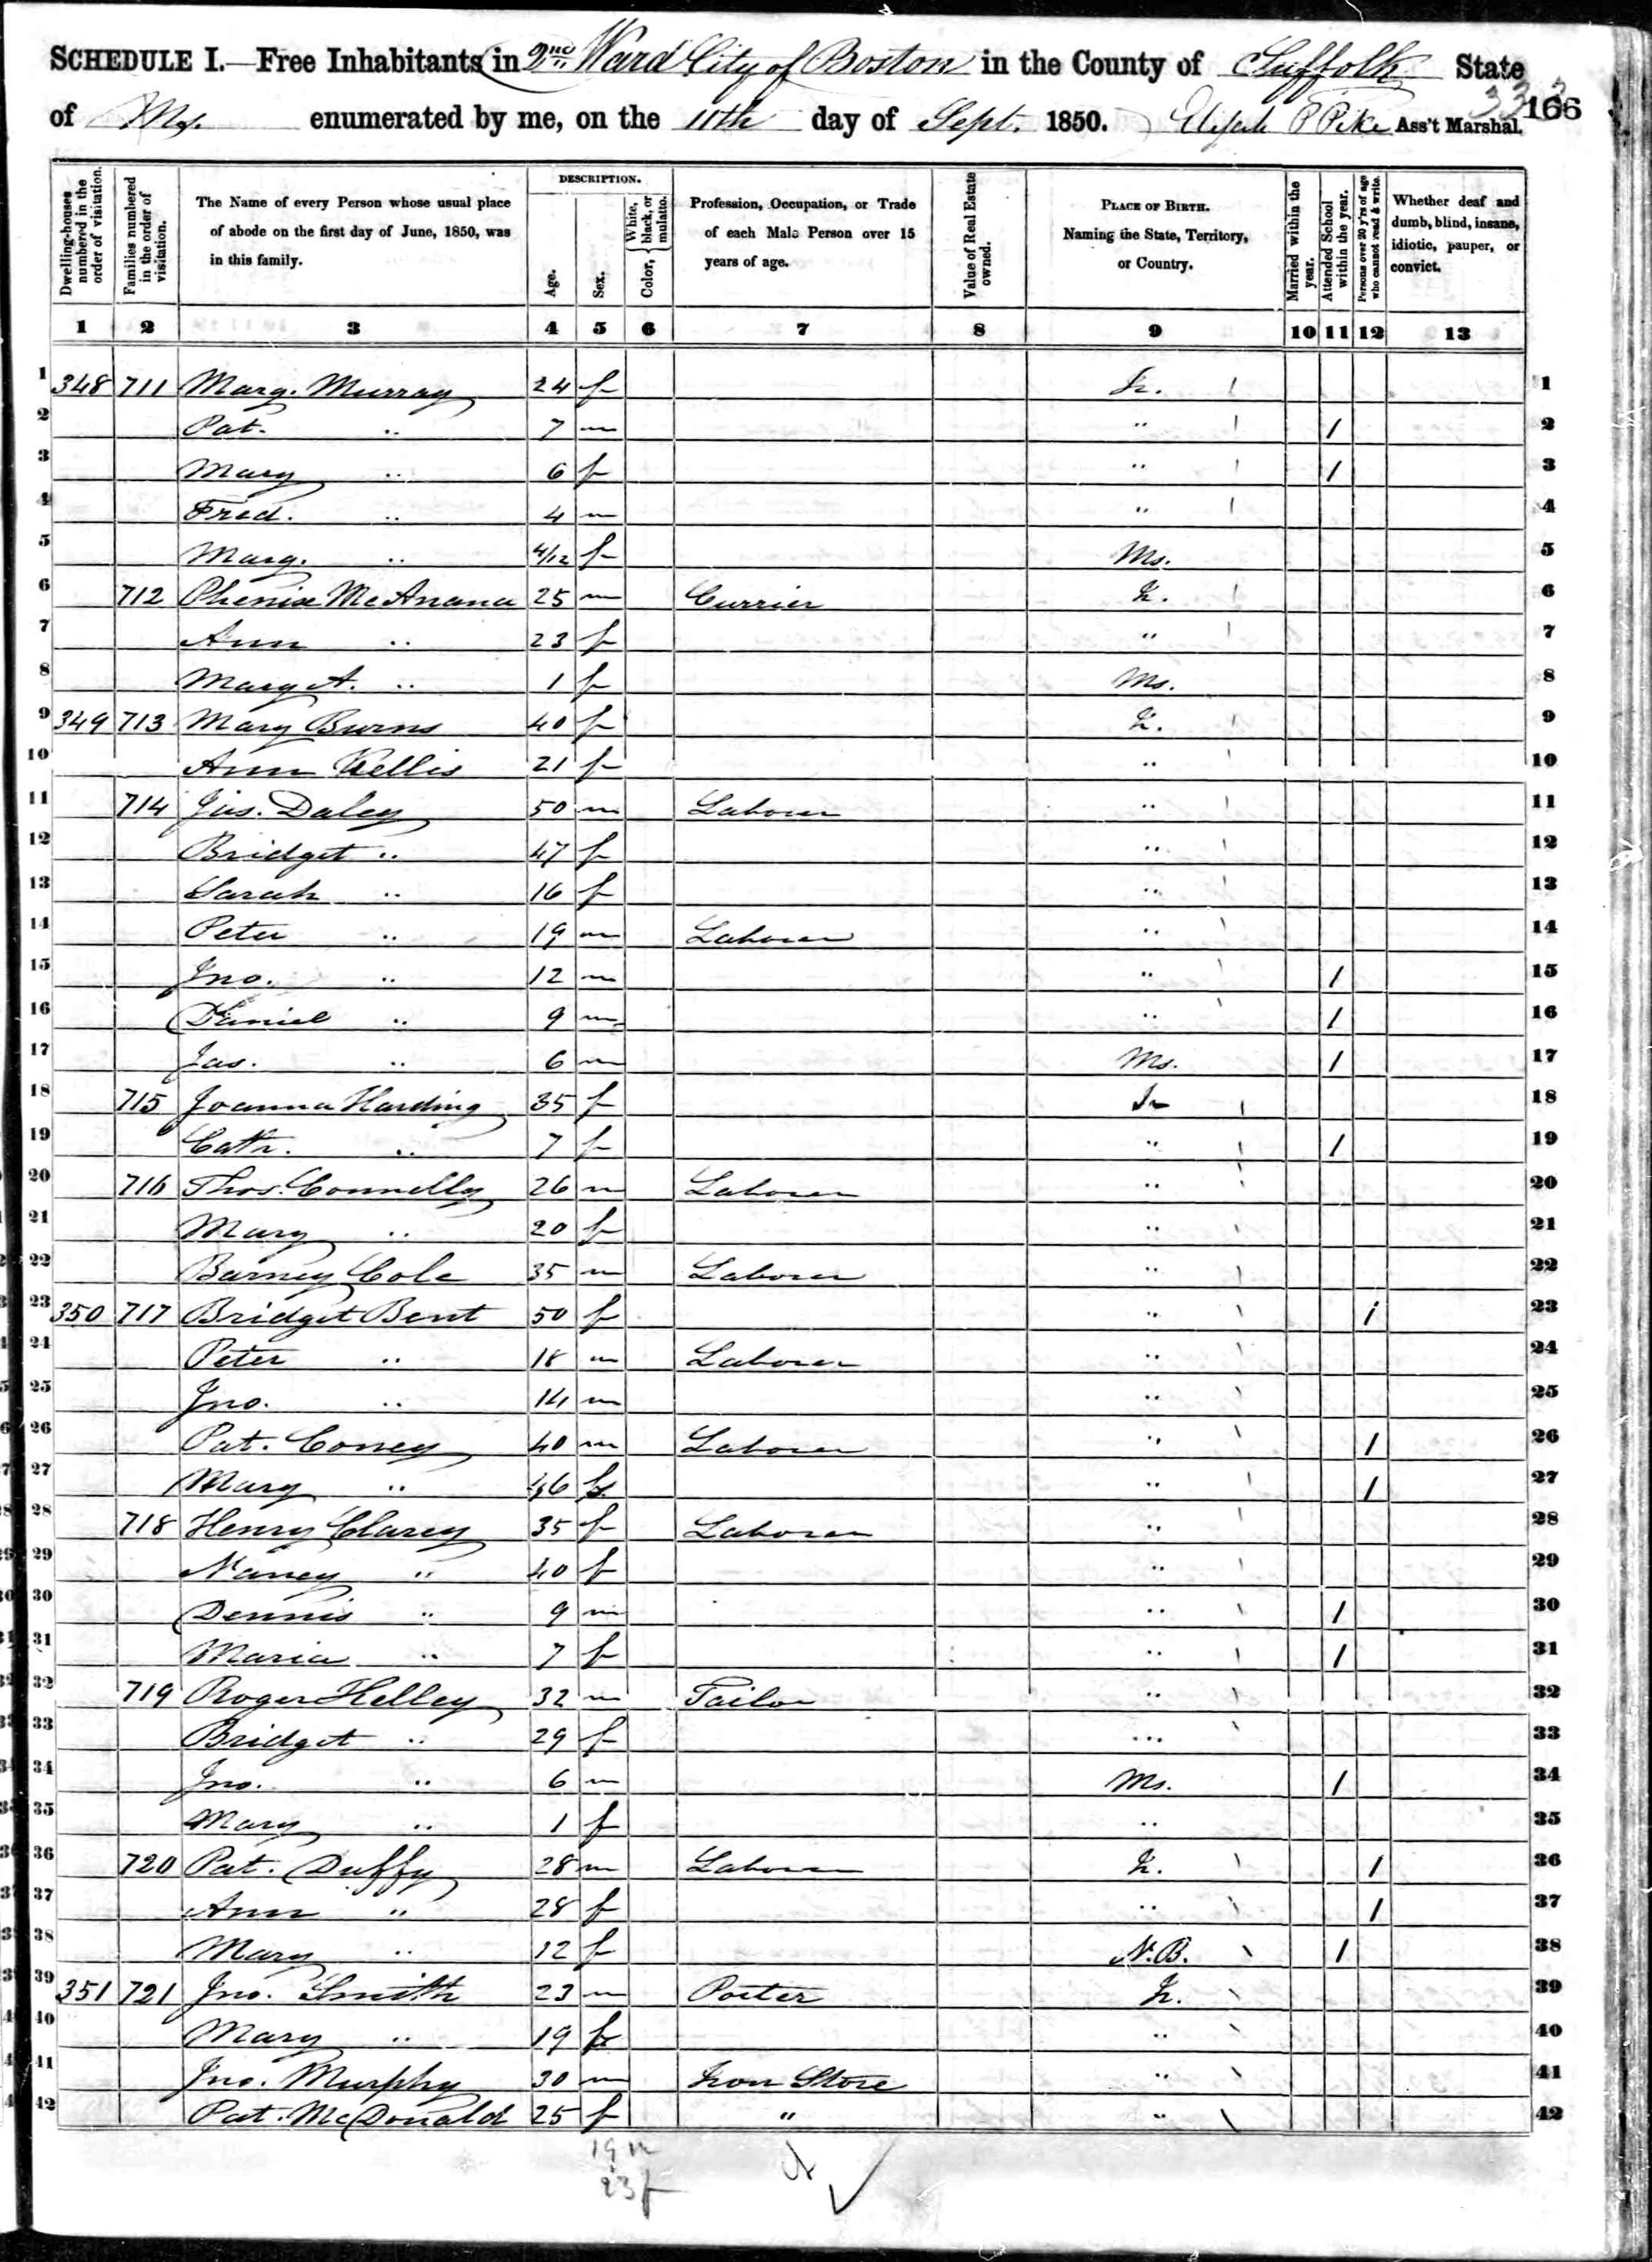 Image of an 1850 census page